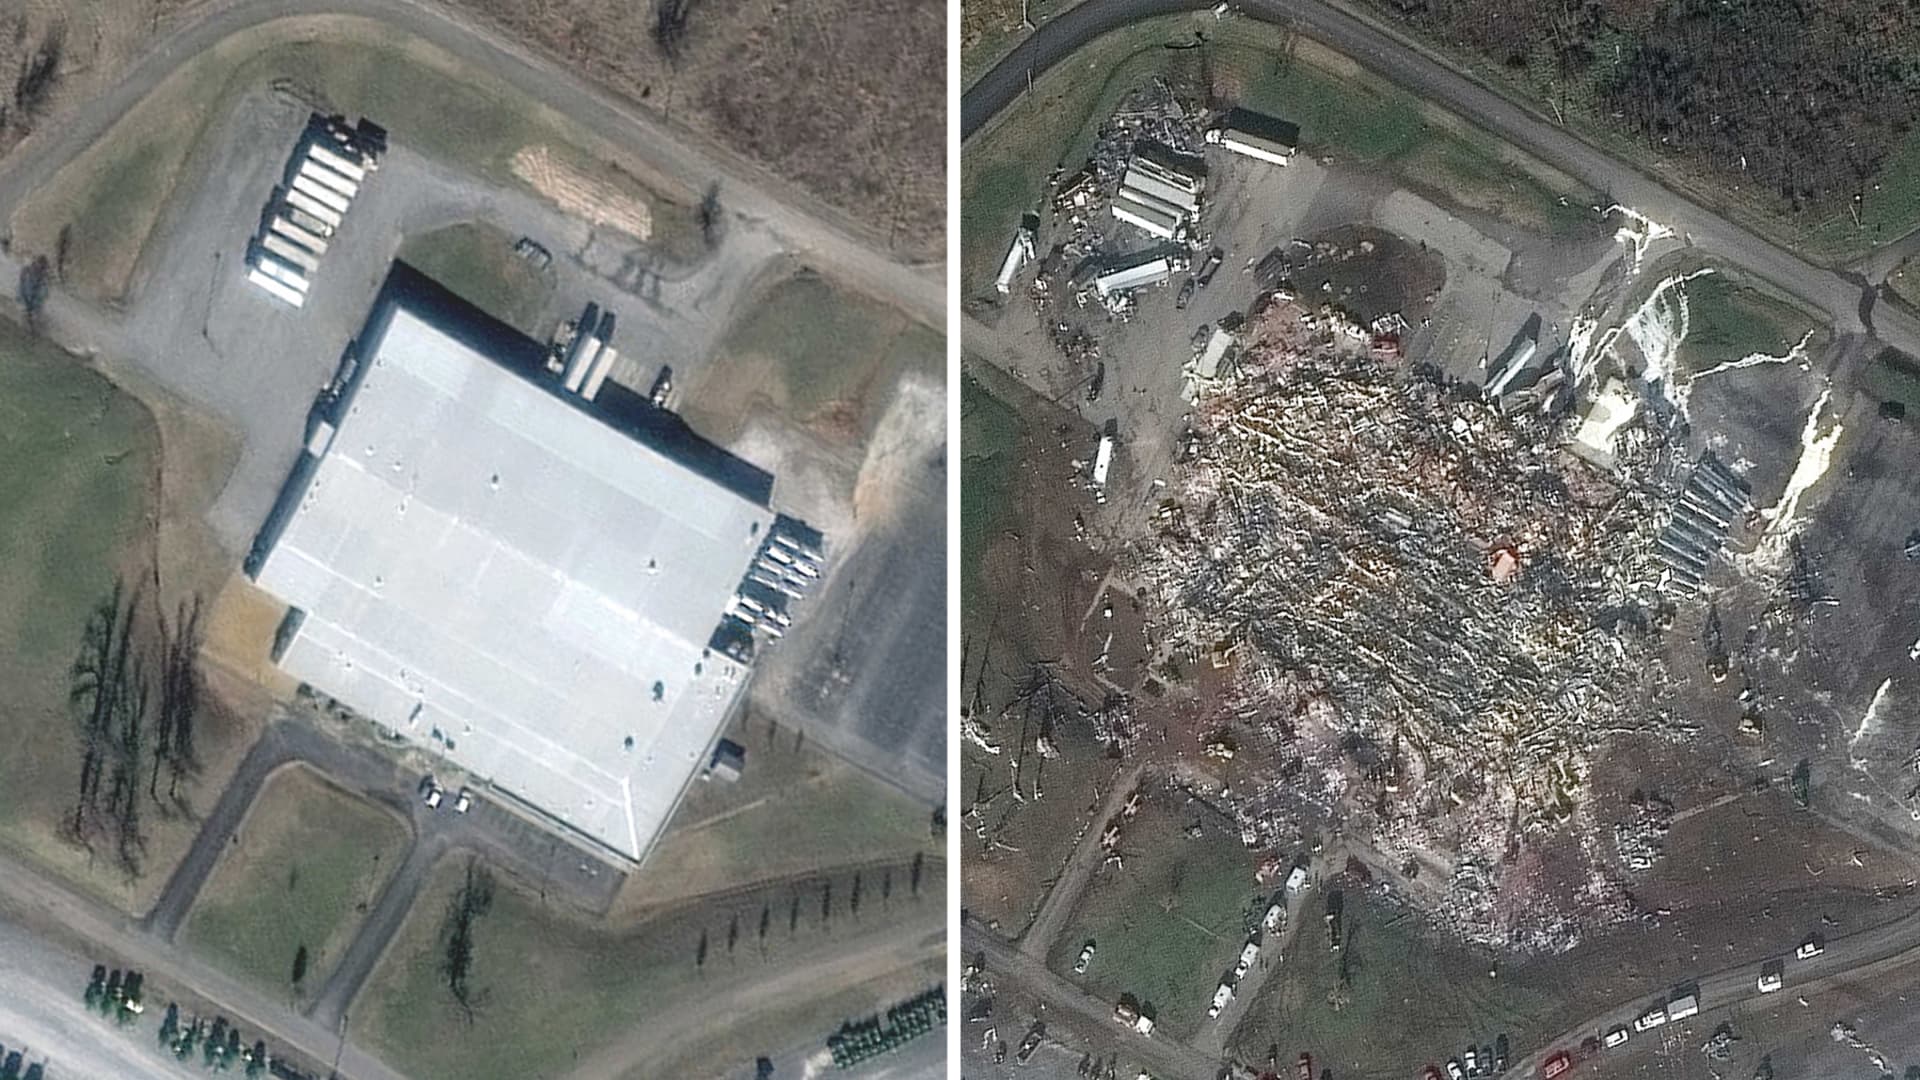 Before and after satellite images showing tornado destruction in Mayfield, Kentucky on Dec. 11th, 2021.